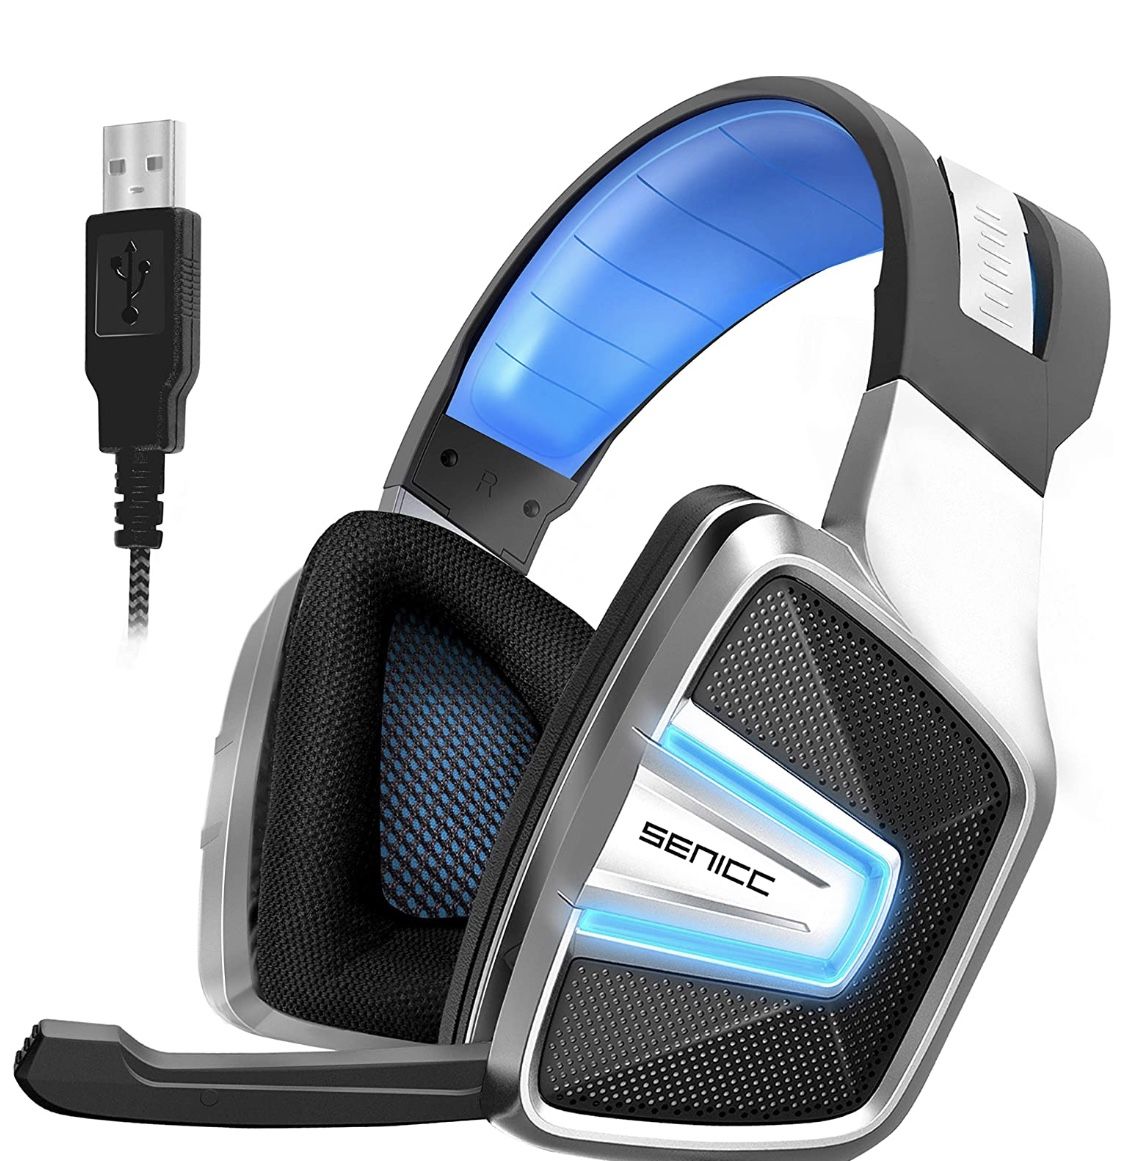 NEW! Computer Gaming Headset USB Type LED Light for PC MAC Laptop, PS4 Headphones with Noise Canceling Microphone